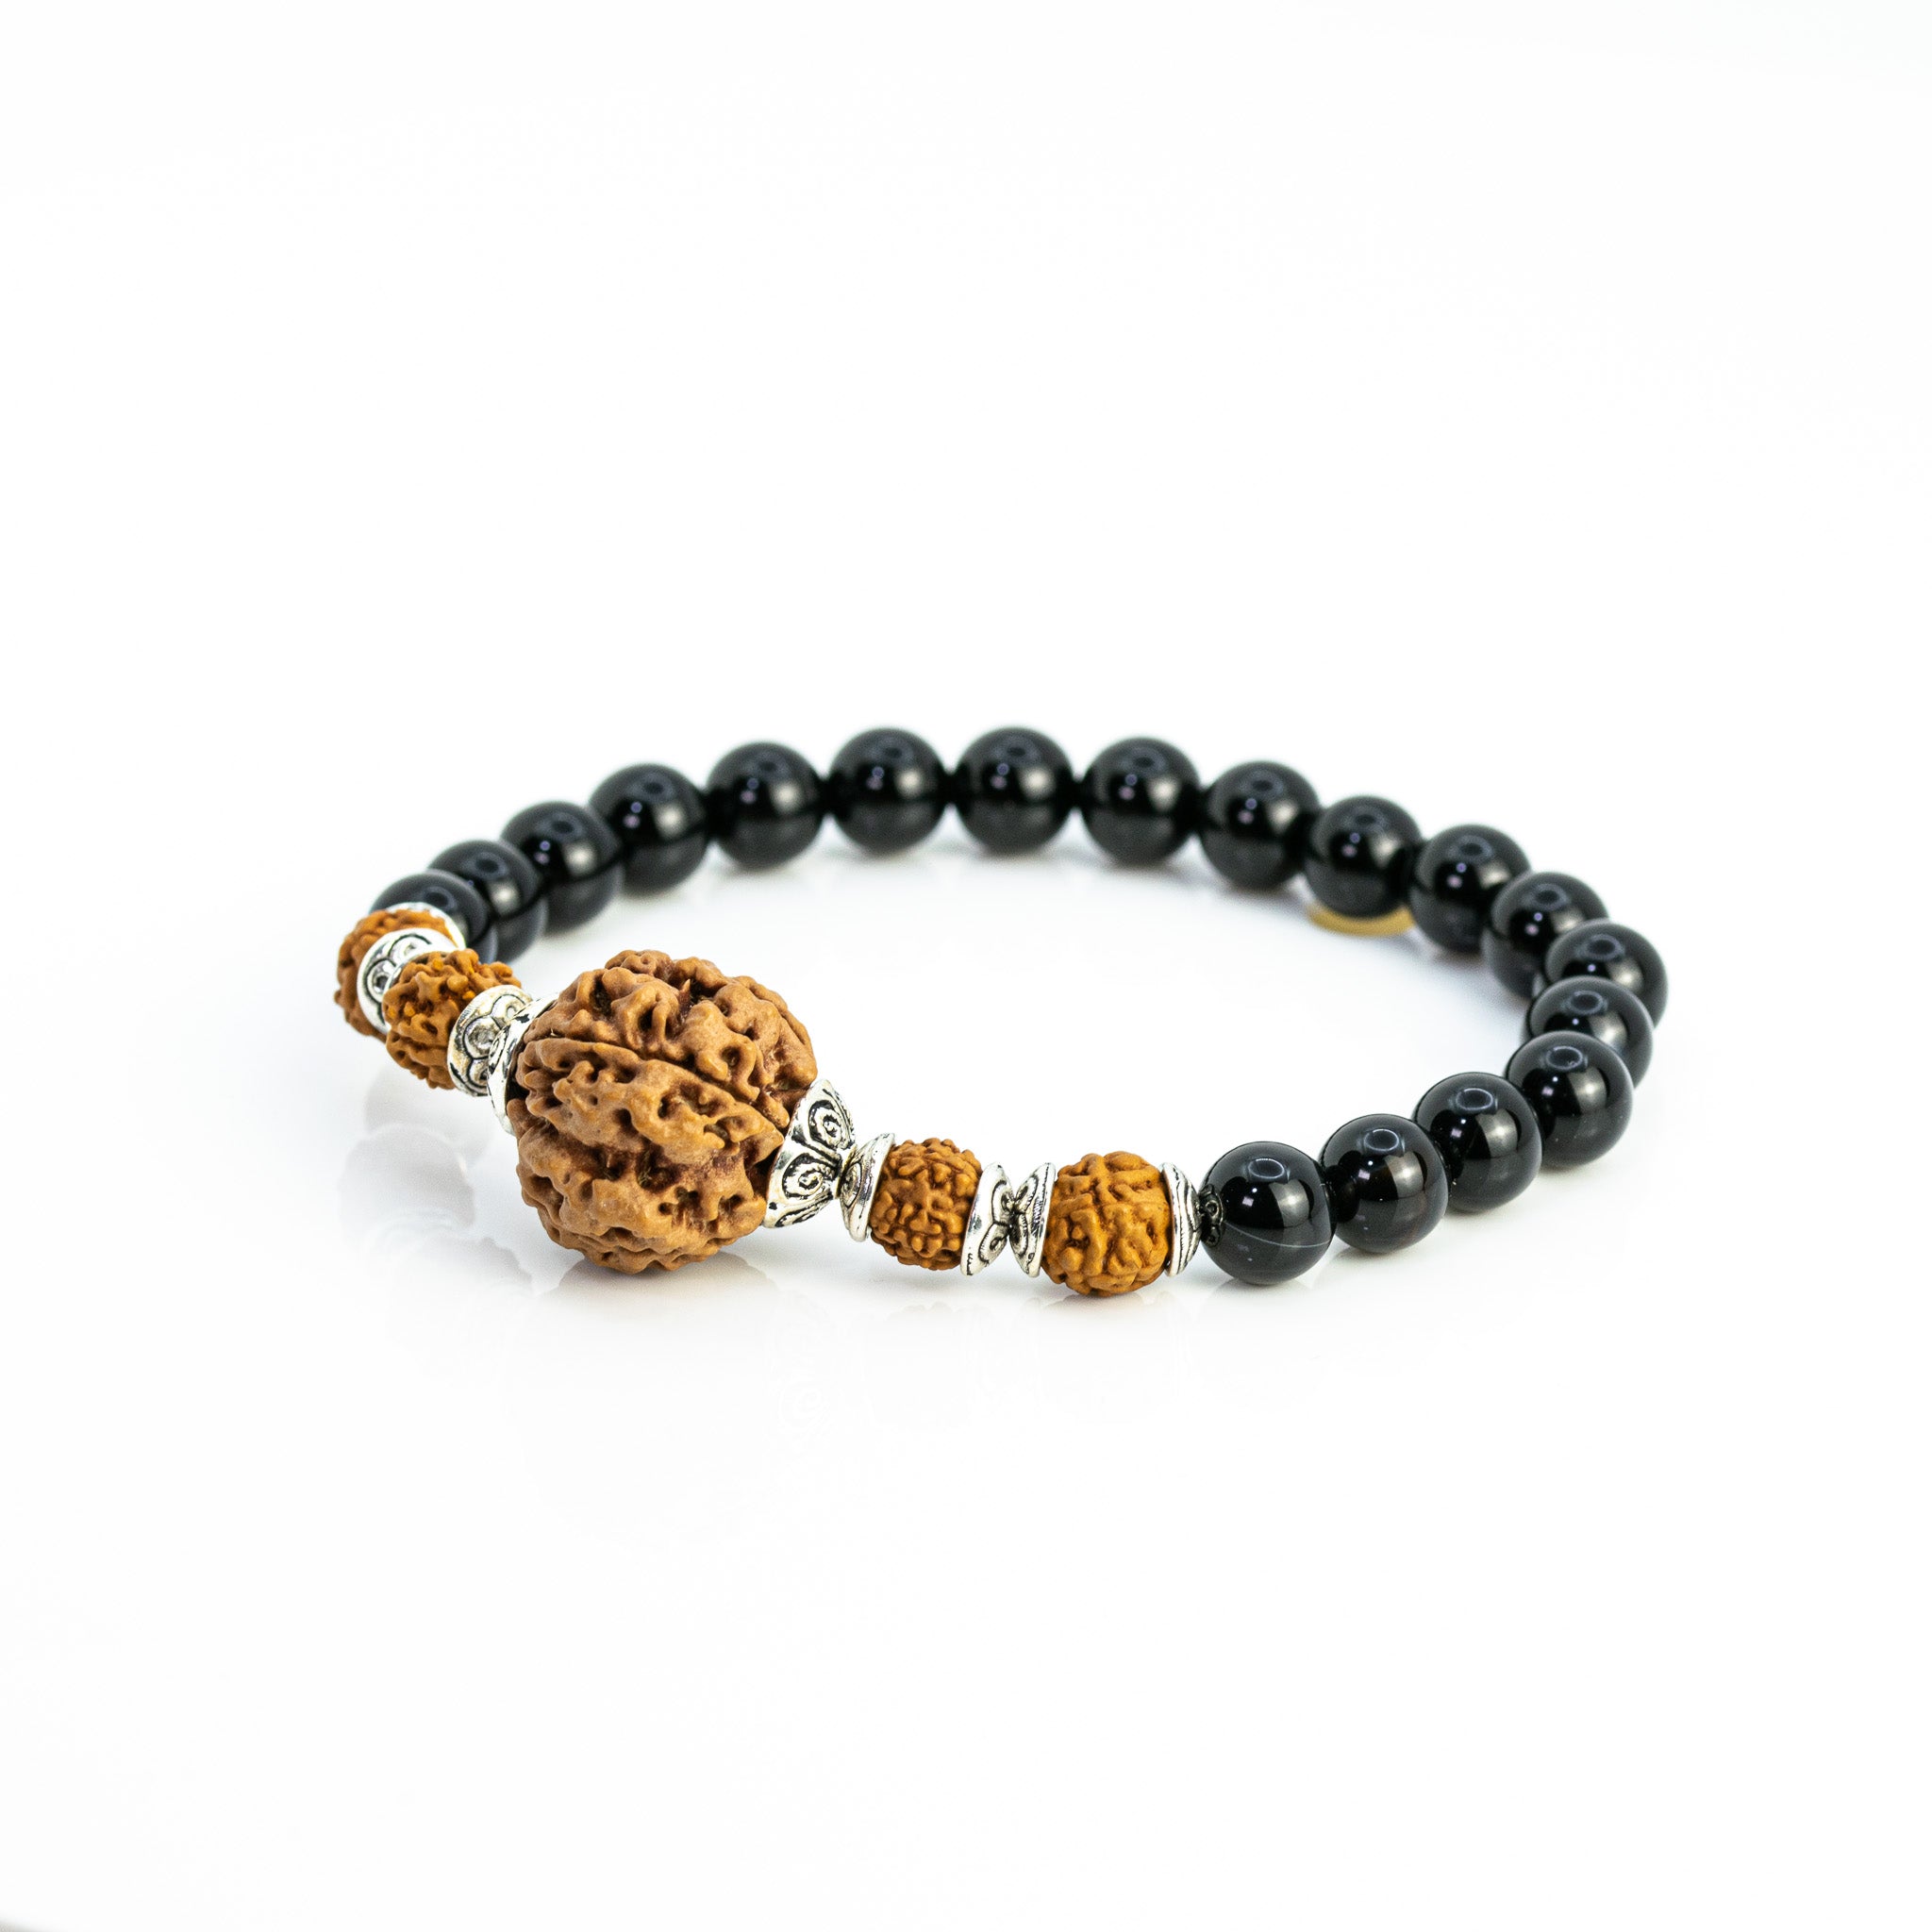 Big Rudraksh and Onyx Bracelet 2 for Growth, protecion & peace